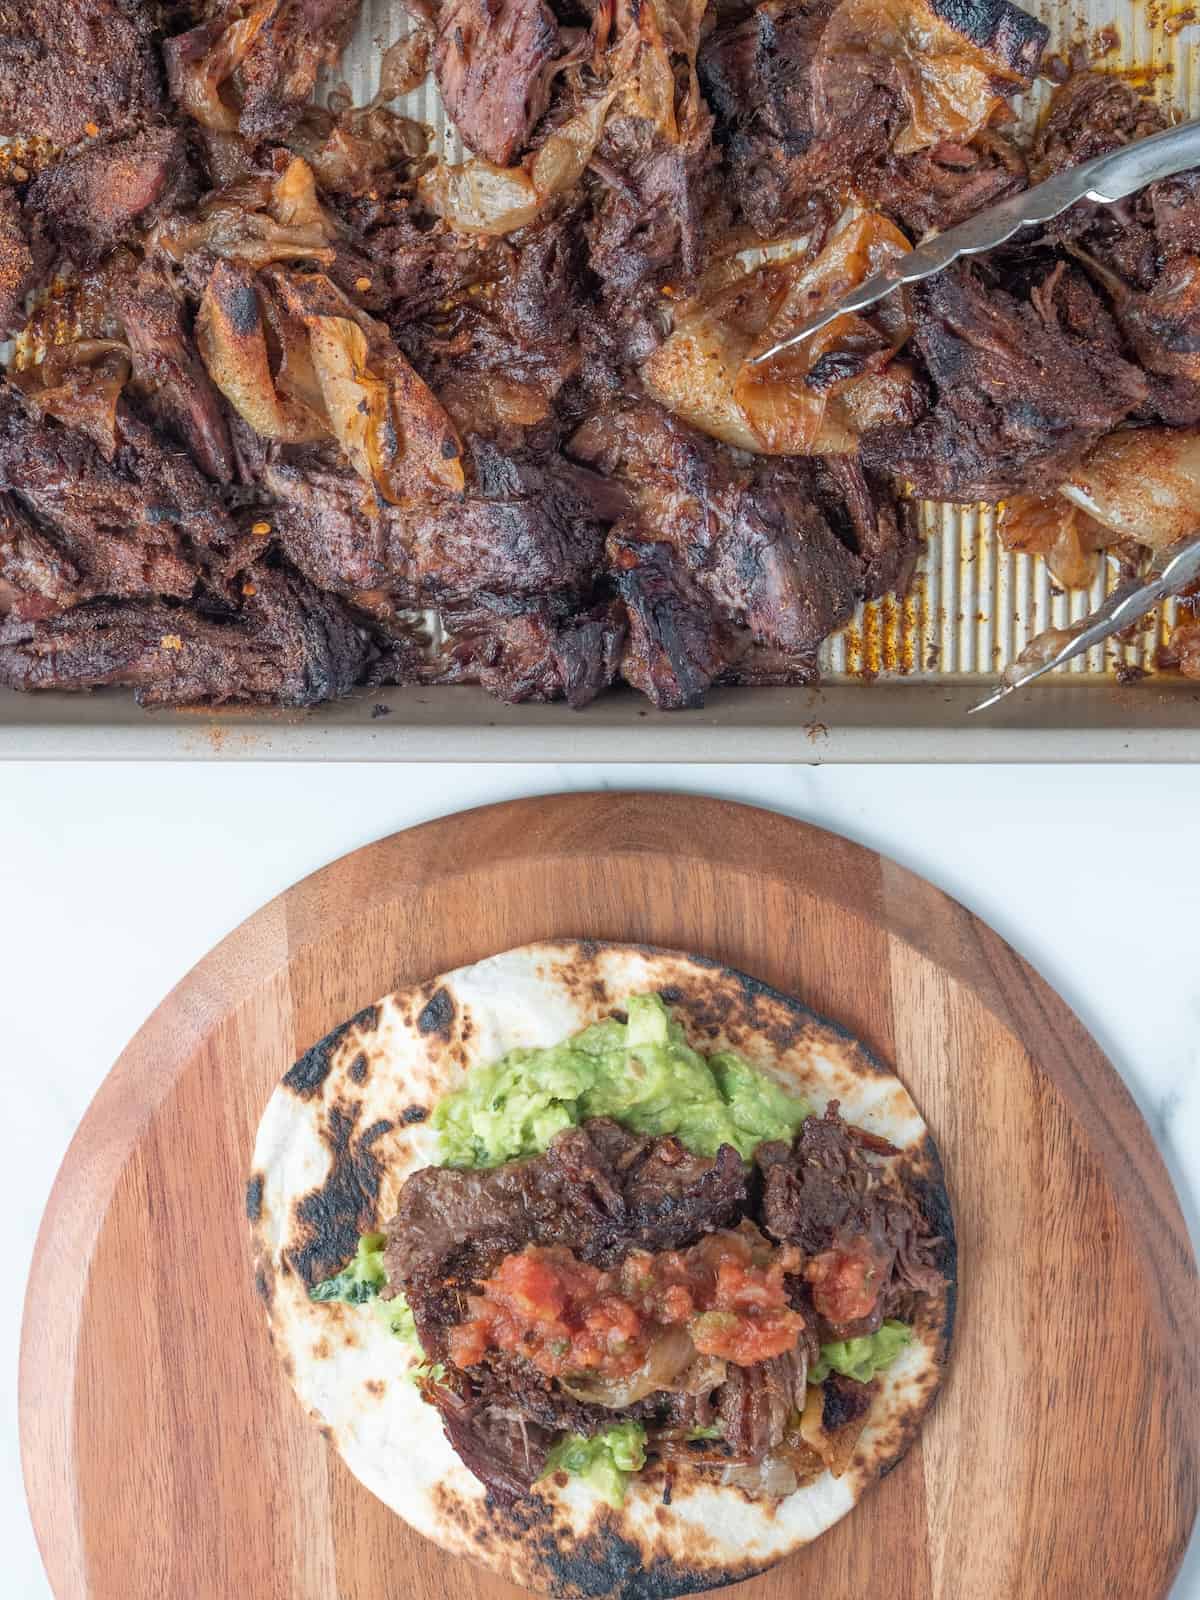 A baking sheet with shredded chuck roast and tongs, and a wooden platter with a taco, comprising a charred tortilla topped with guacamole, shredded chuck roast and salsa.